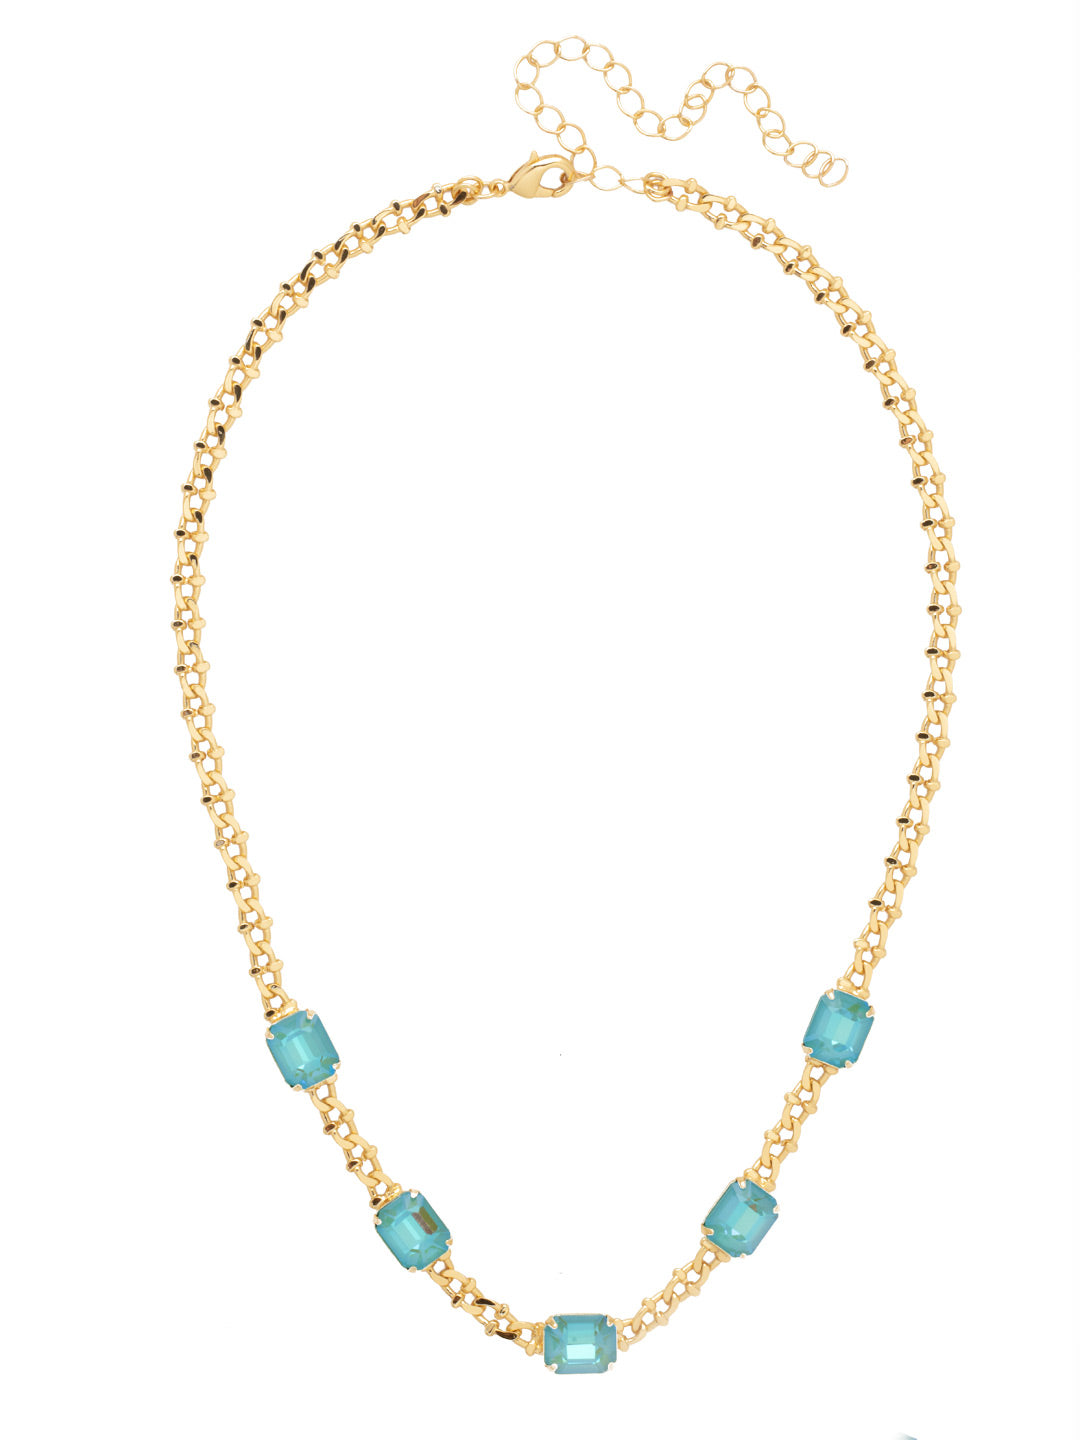 Octavia Repeating Tennis Necklace - NFP7BGPRT - <p>The Octavia Repeating Tennis Necklace features five mini emerald cut crystals on an adjustable curb chain, secured by a lobster claw clasp. From Sorrelli's Portofino collection in our Bright Gold-tone finish.</p>